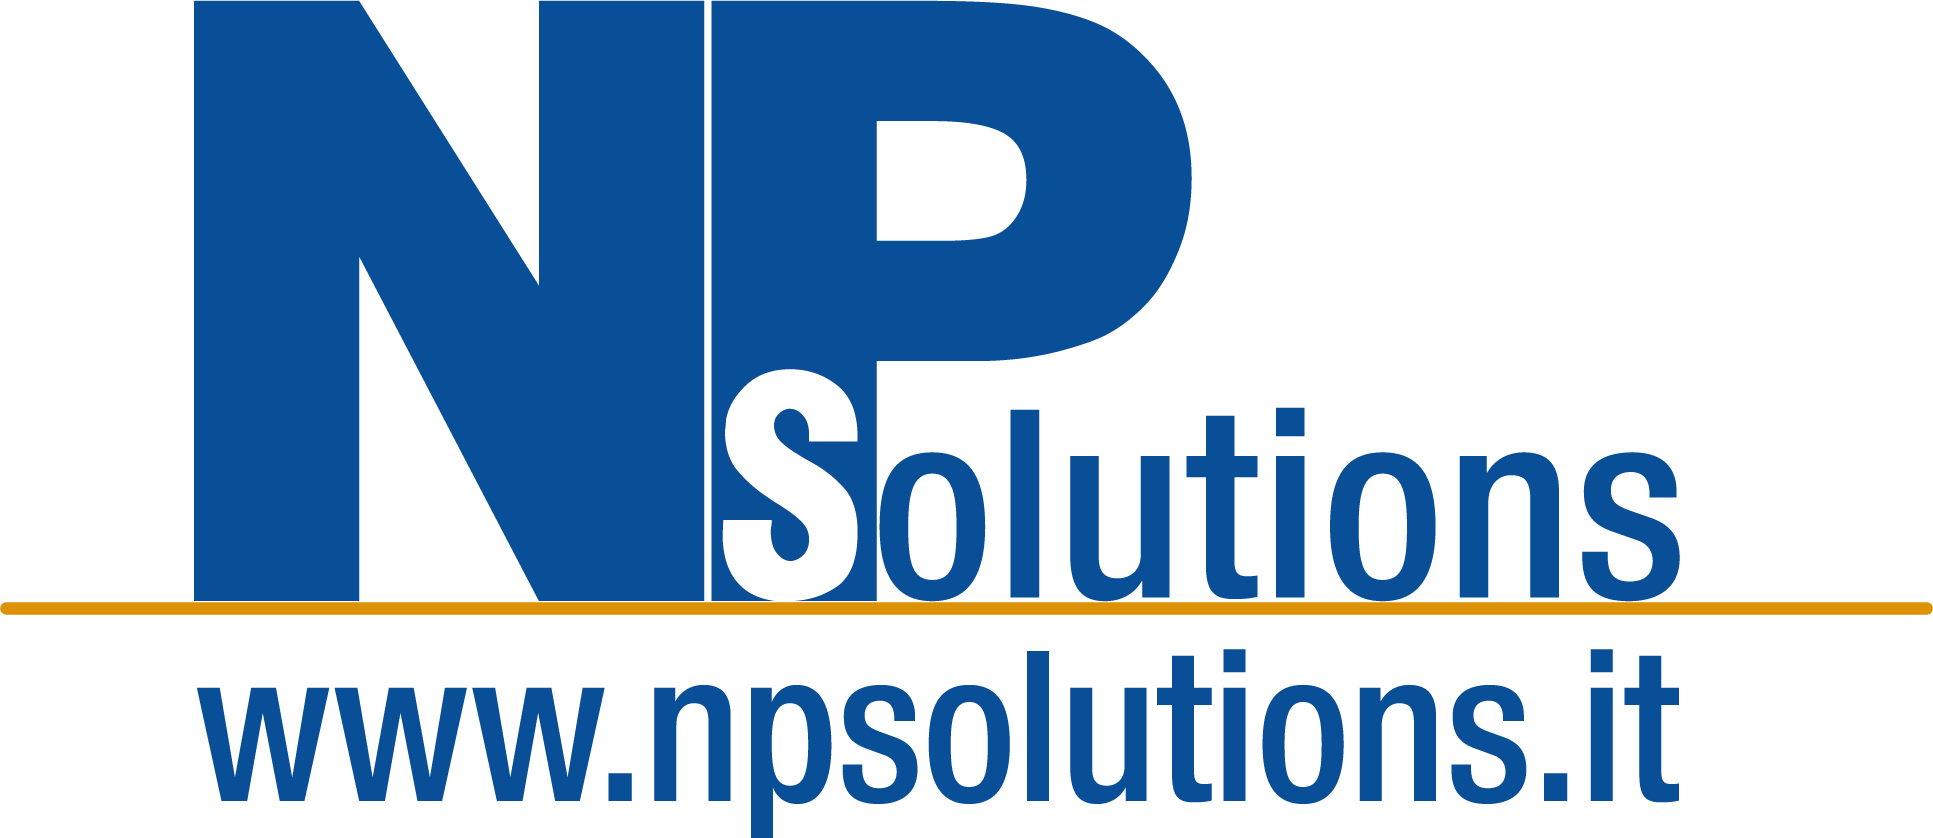 NP Solutions